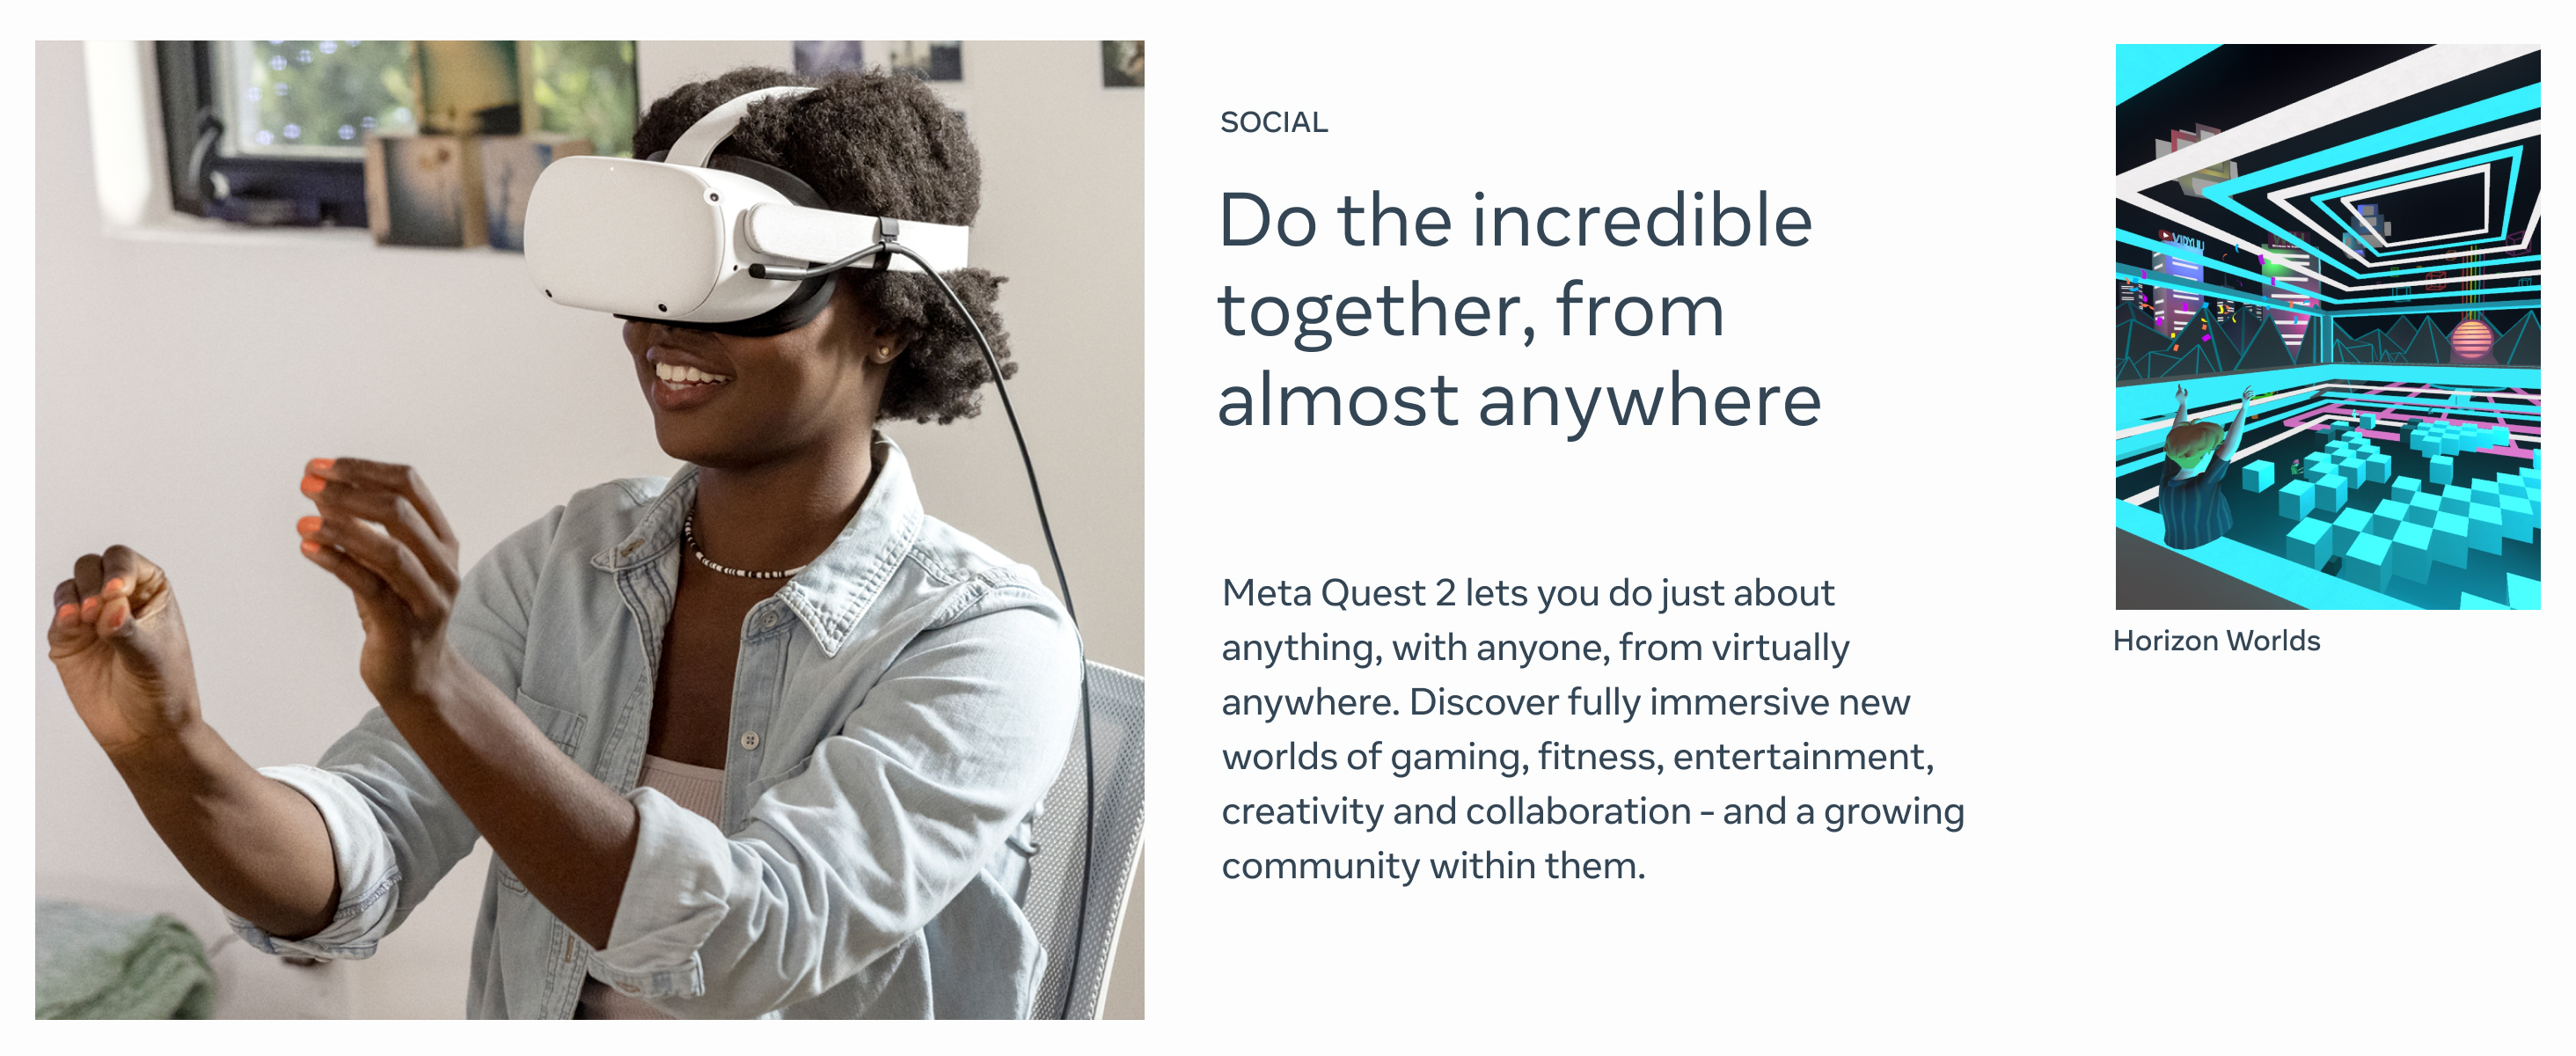 Deal Alert: Score a Meta Quest 2 256GB VR Headset for Only $330.56 at Woot  - IGN